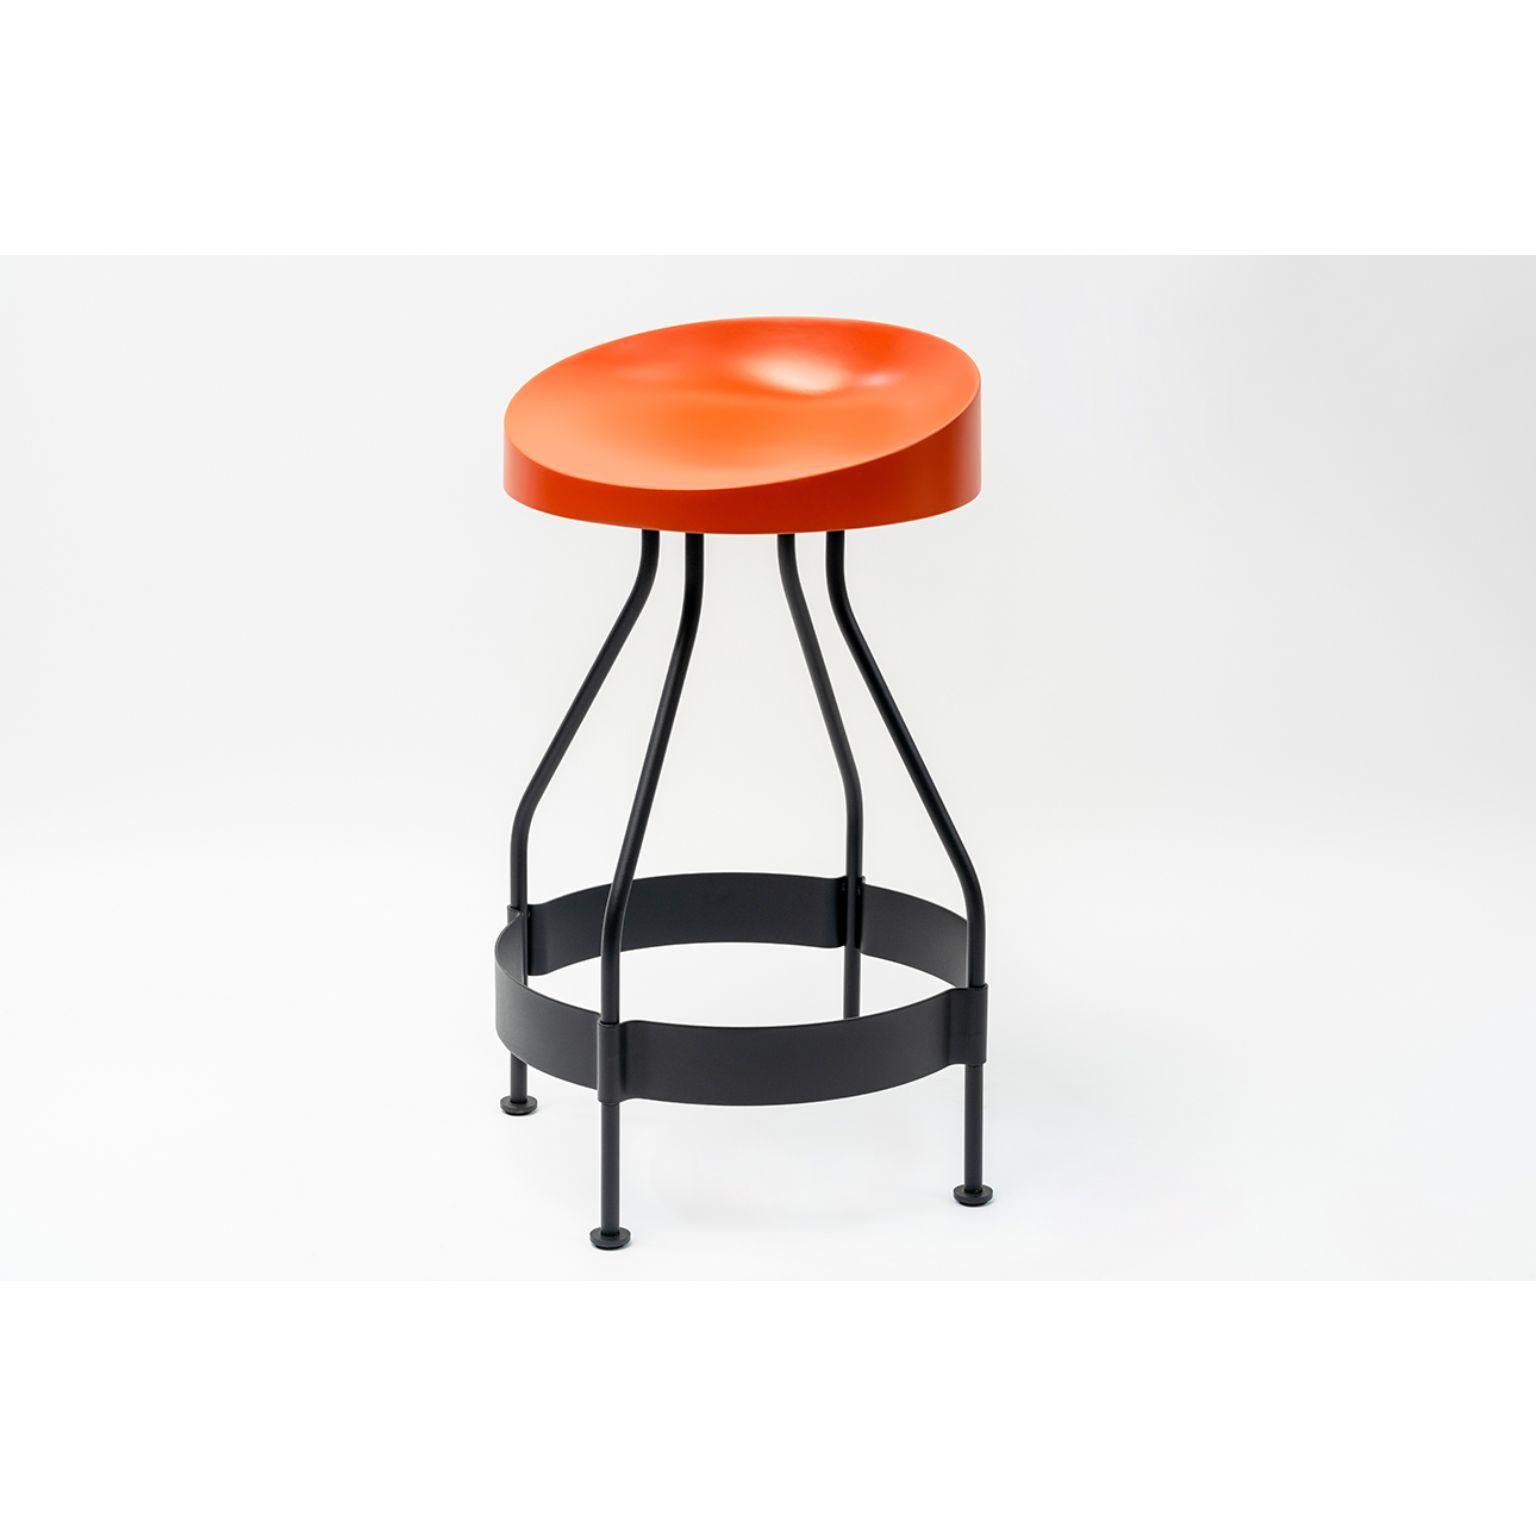 Olindias bar stool by Luca Nichetto
Materials: Shell: Dark green NCS 8010 B70G/Coral NCS 2570 Y70R/ Duck Blue NCS 6020 B10G/Warm 
 Light NCS 2002 Y50R lacquered Polyurethane
 Structure: Black powder-coated metal
Dimensions: W48. 2 x D48.2 x H83